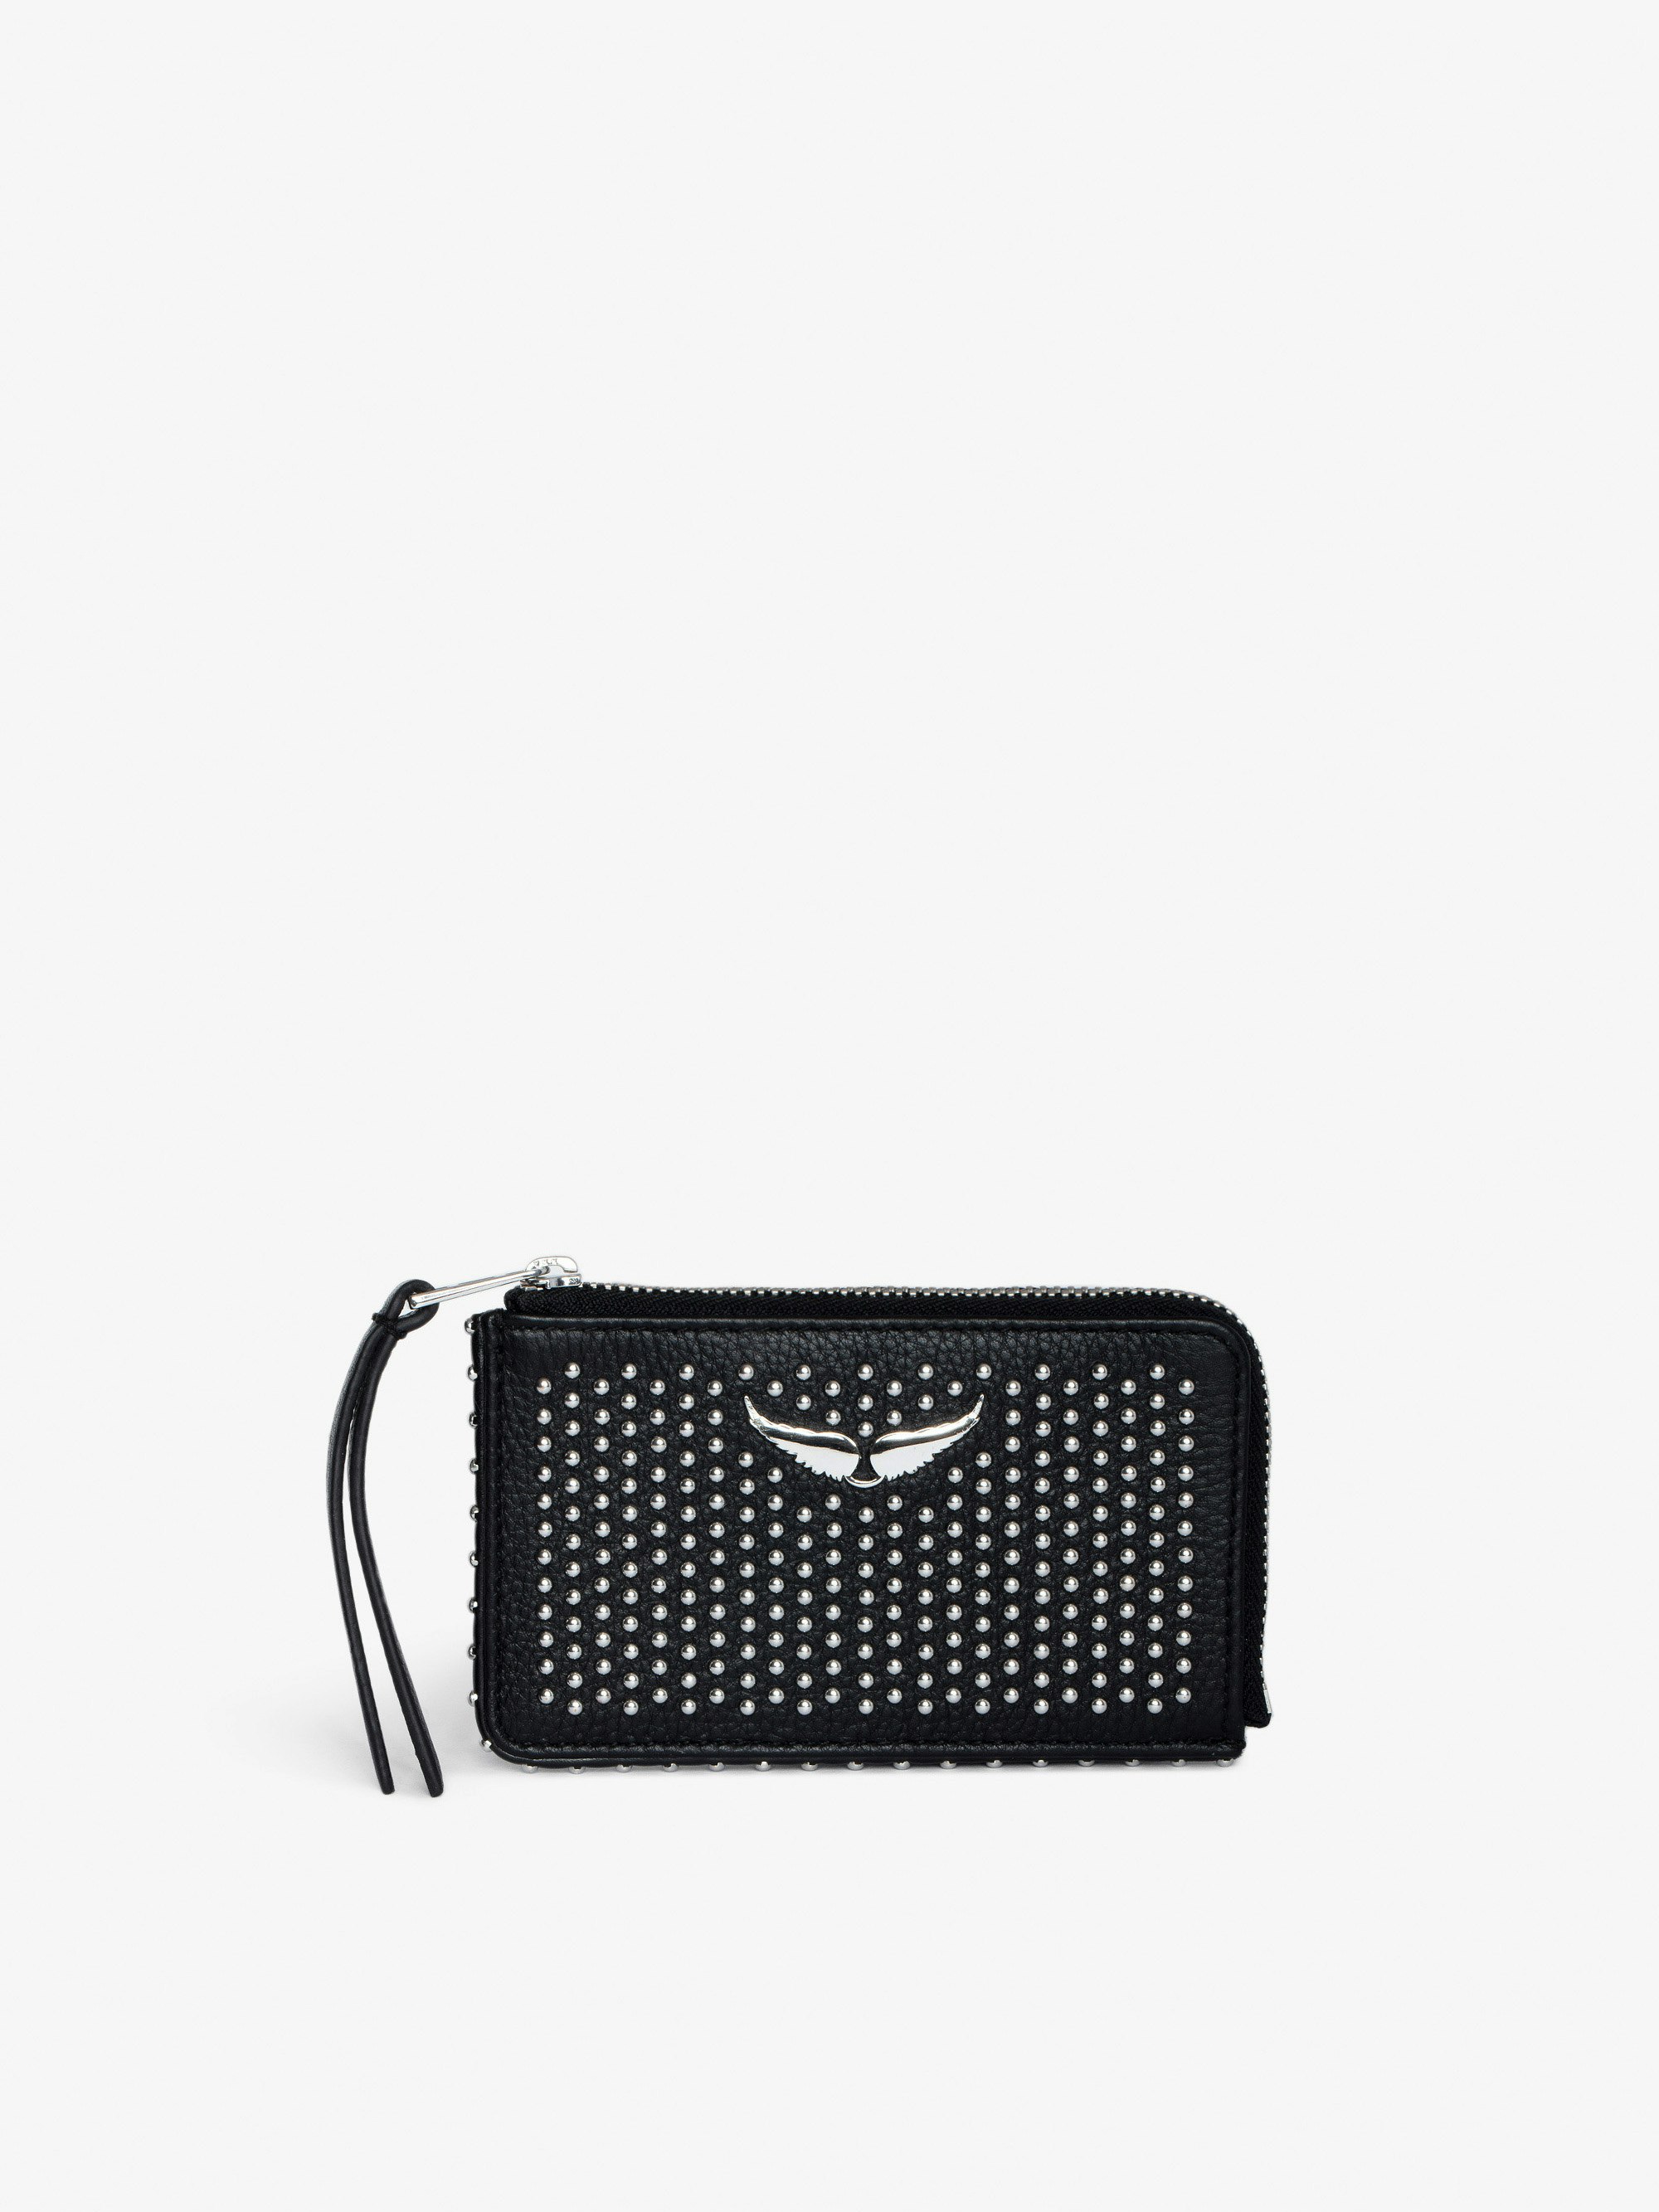 ZV Card Dotted Swiss Card Holder - Women’s black grained leather card holder with studs, piping and wings charm.